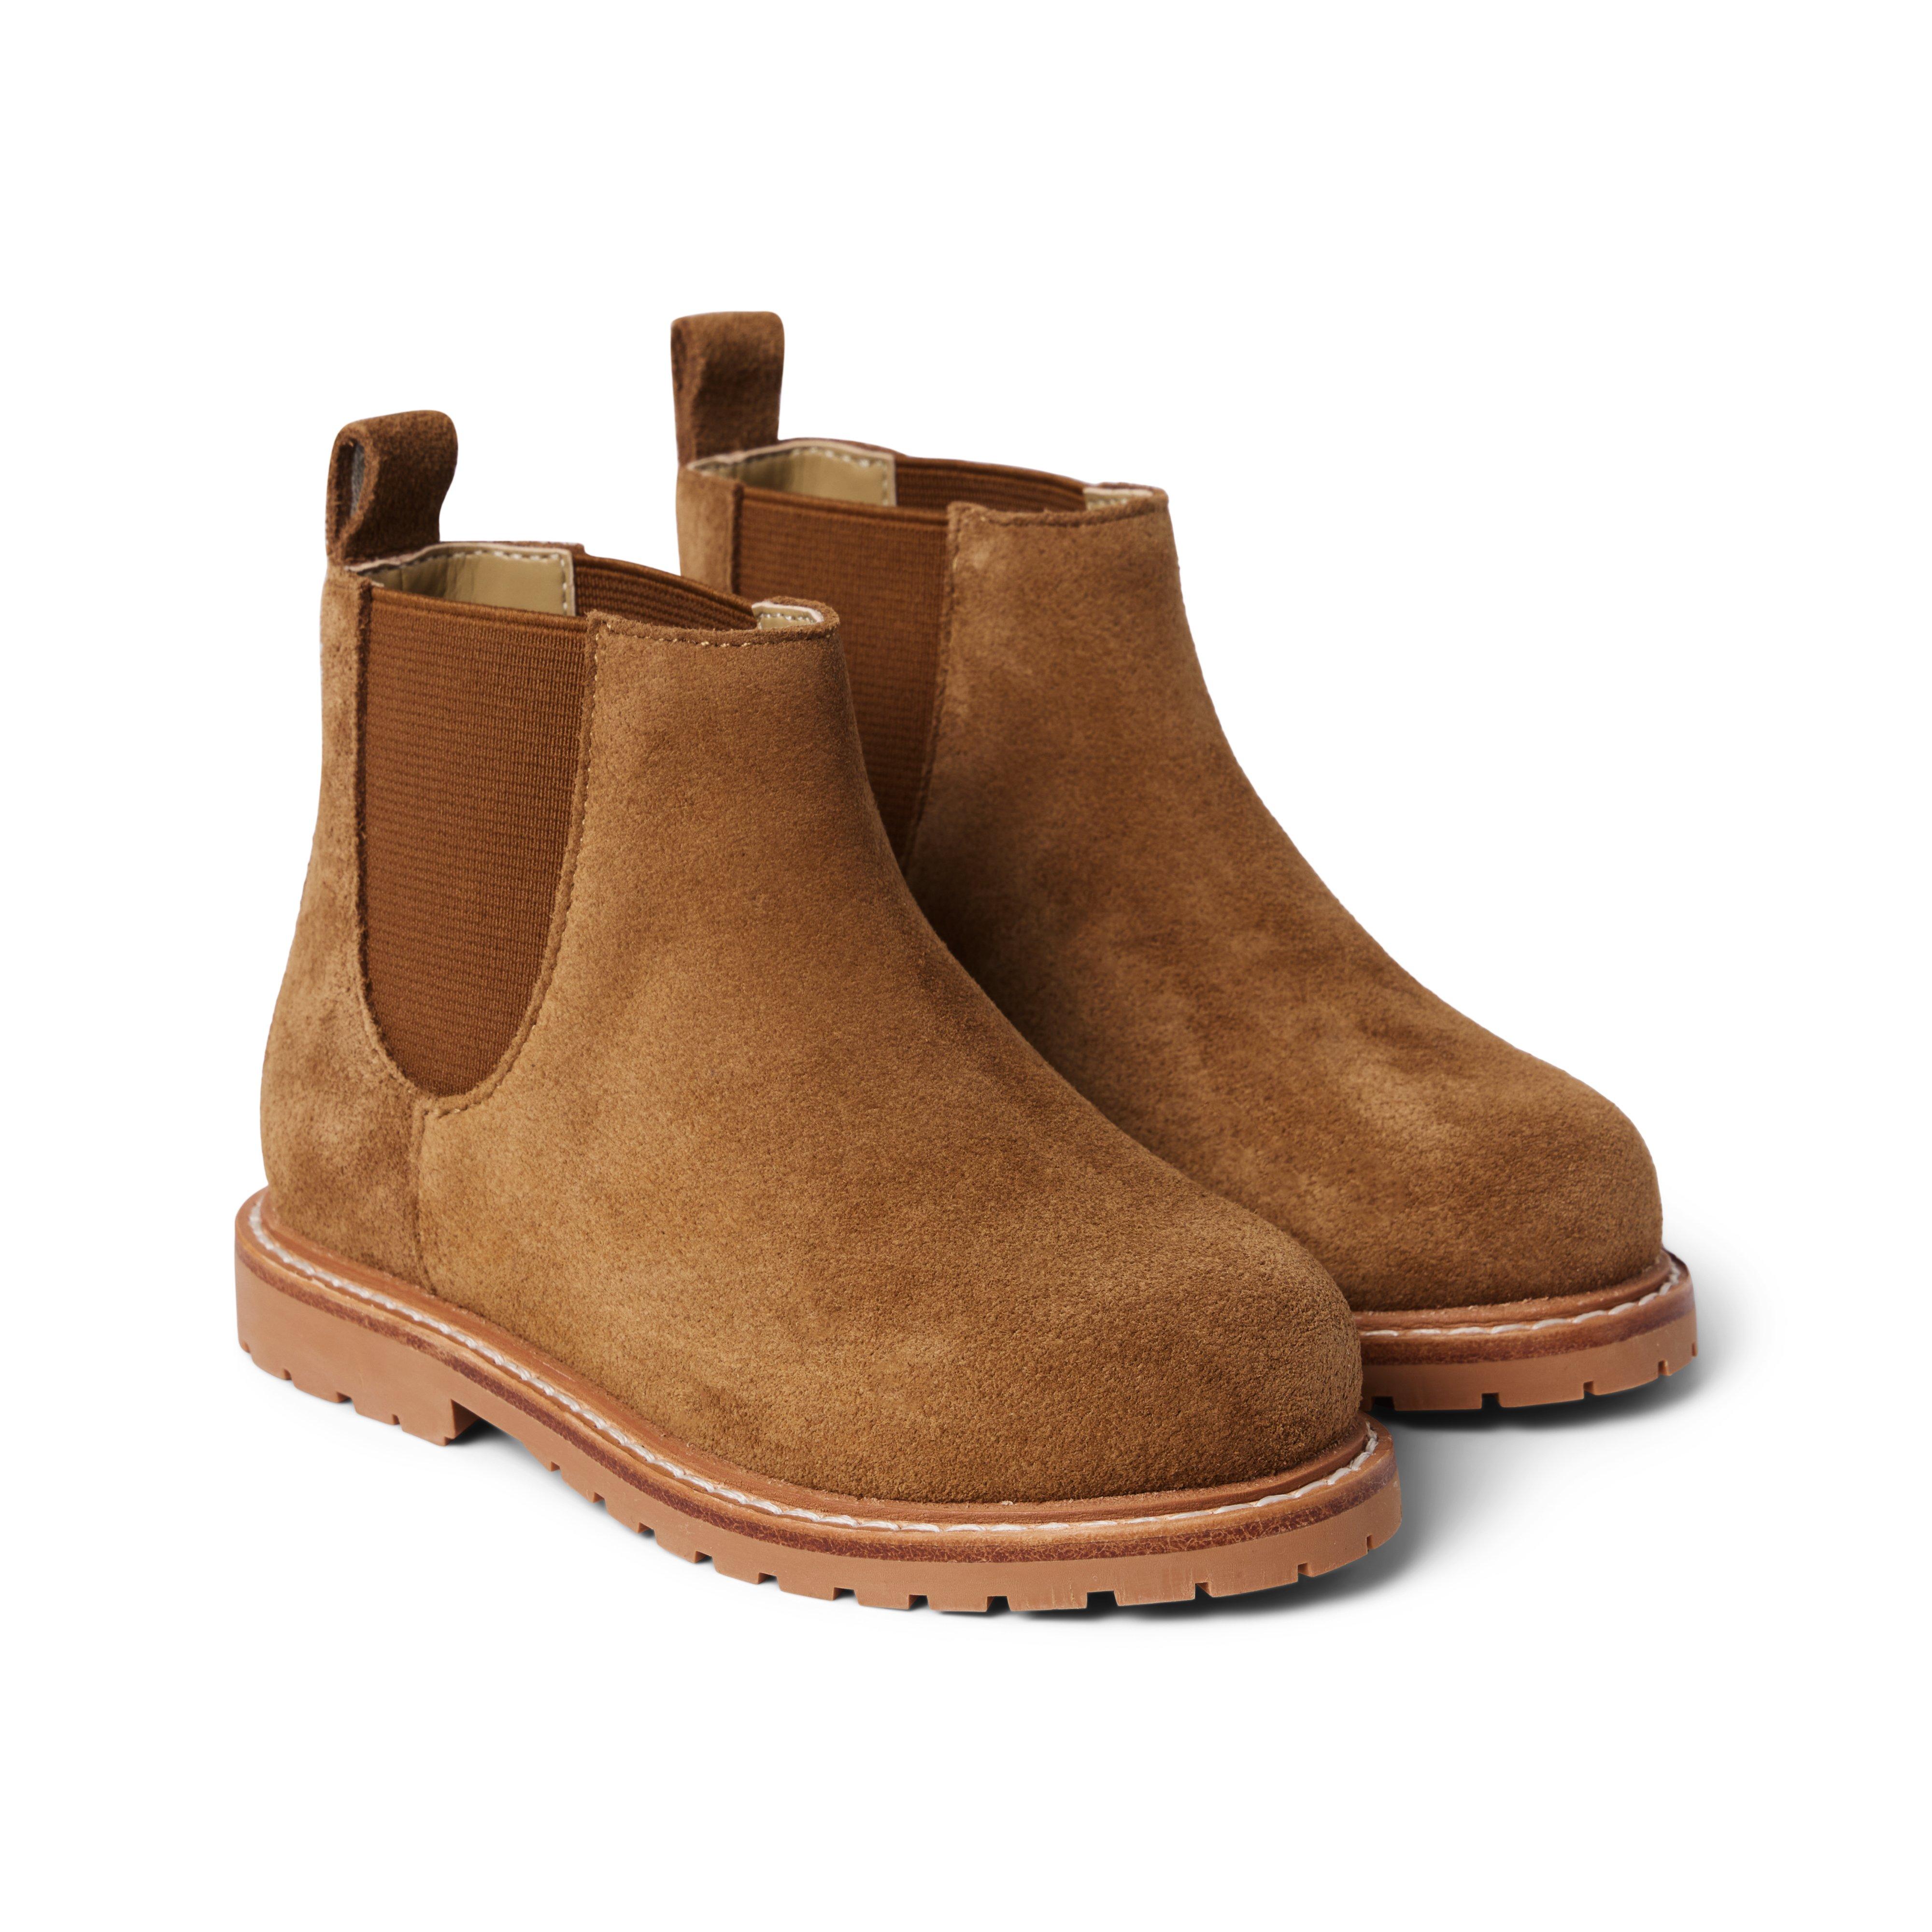 The Suede Chelsea Boot